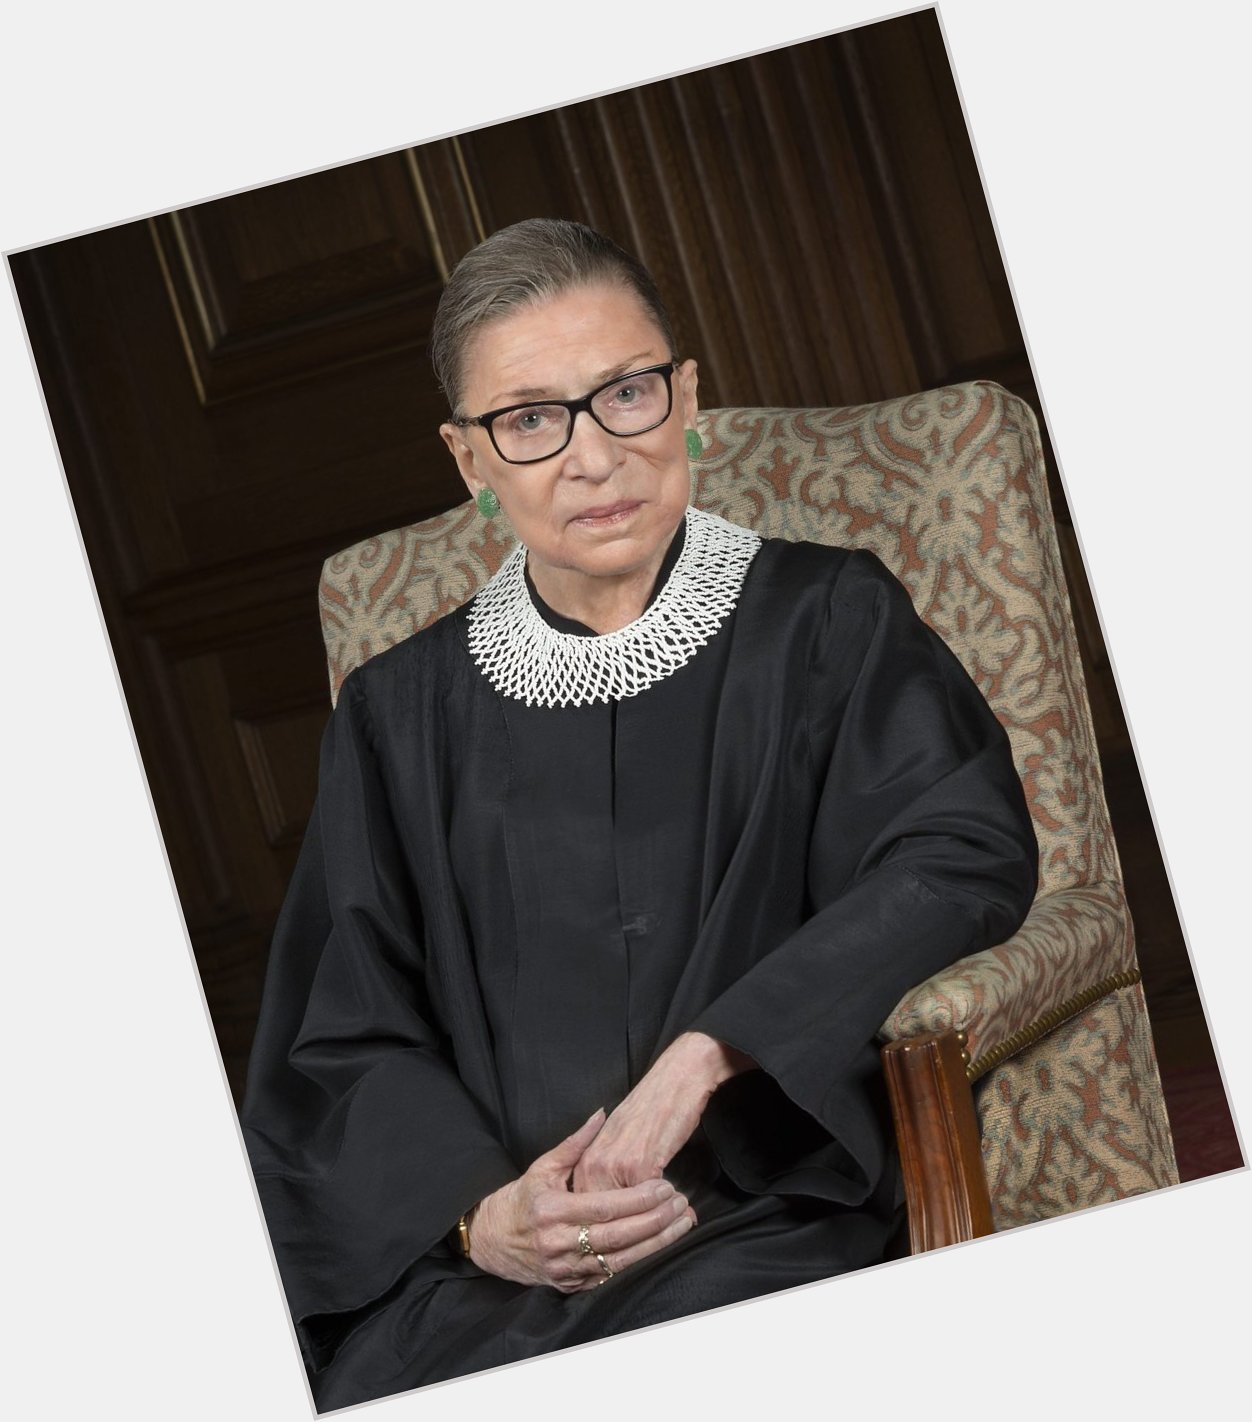 Happy Birthday to the late Ruth Bader Ginsburg who would\ve turned 89 today. 